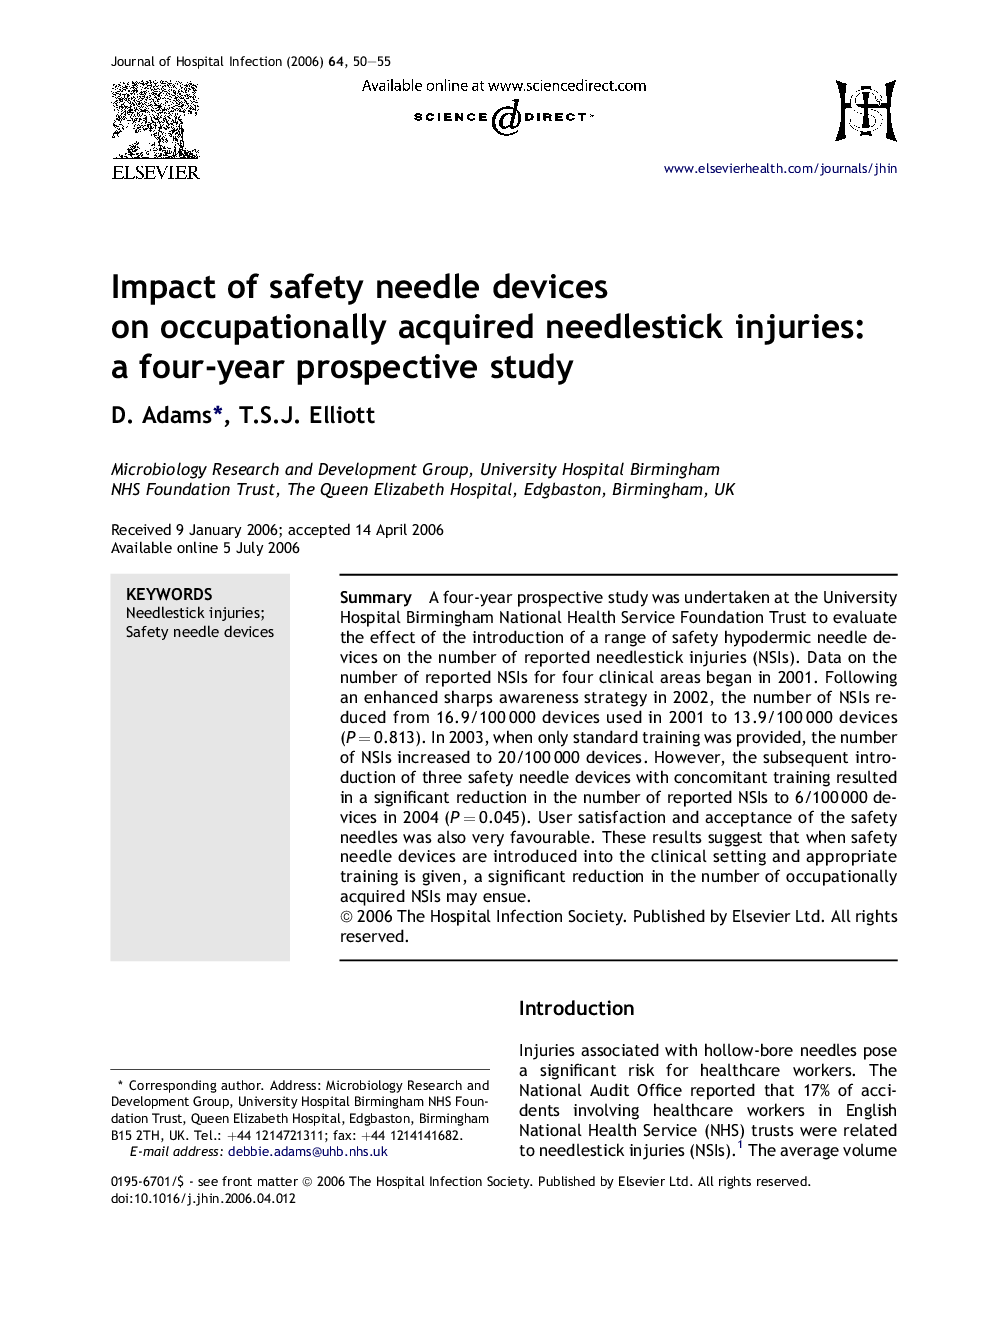 Impact of safety needle devices on occupationally acquired needlestick injuries: a four-year prospective study